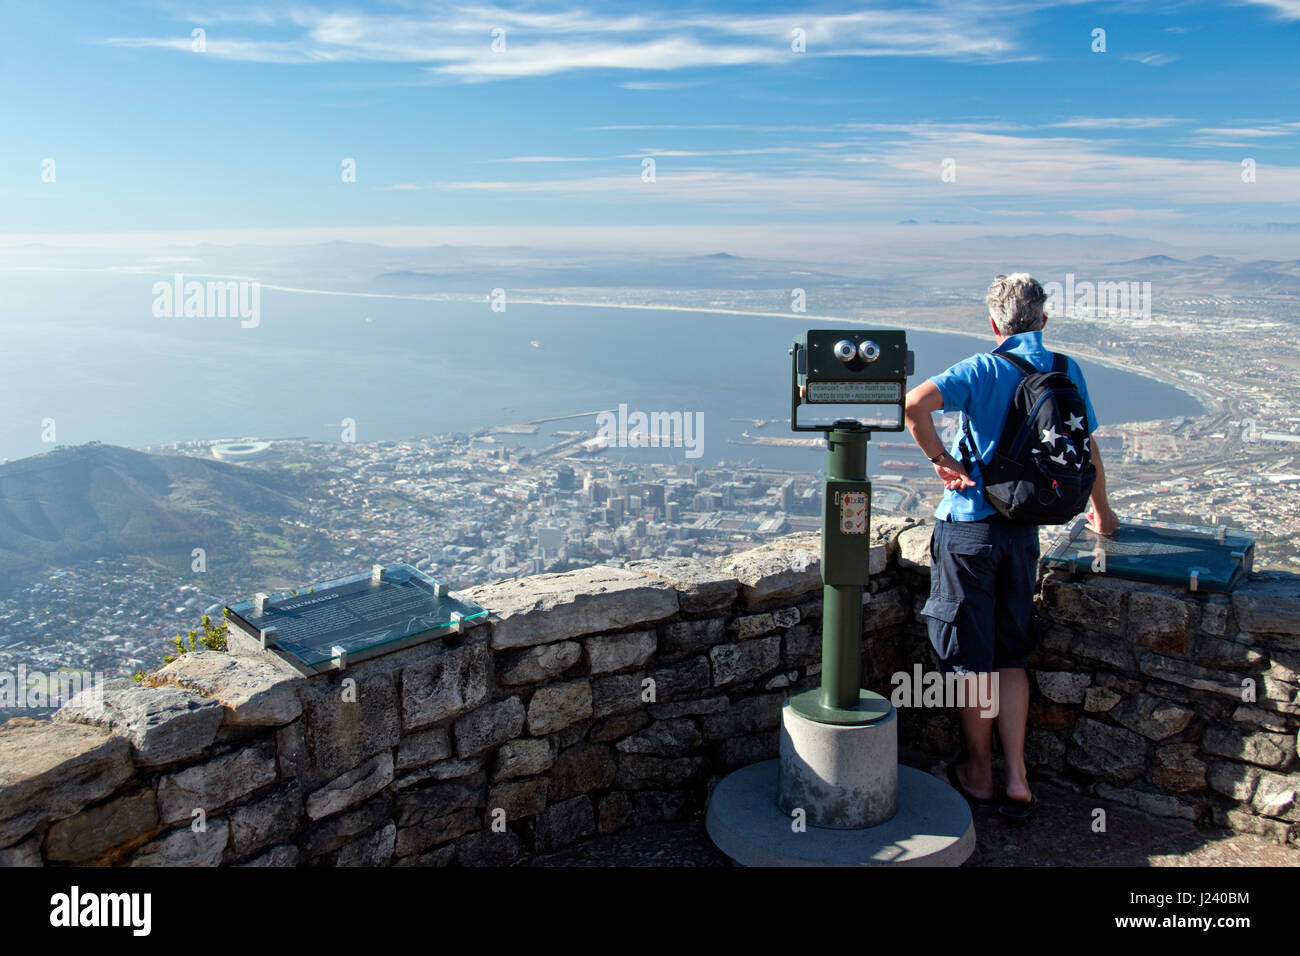 A man takes in the view of Cape Town from the top of Table Mountain, the flat-topped mountain that overlooks Cape Town, South Africa. Stock Photo